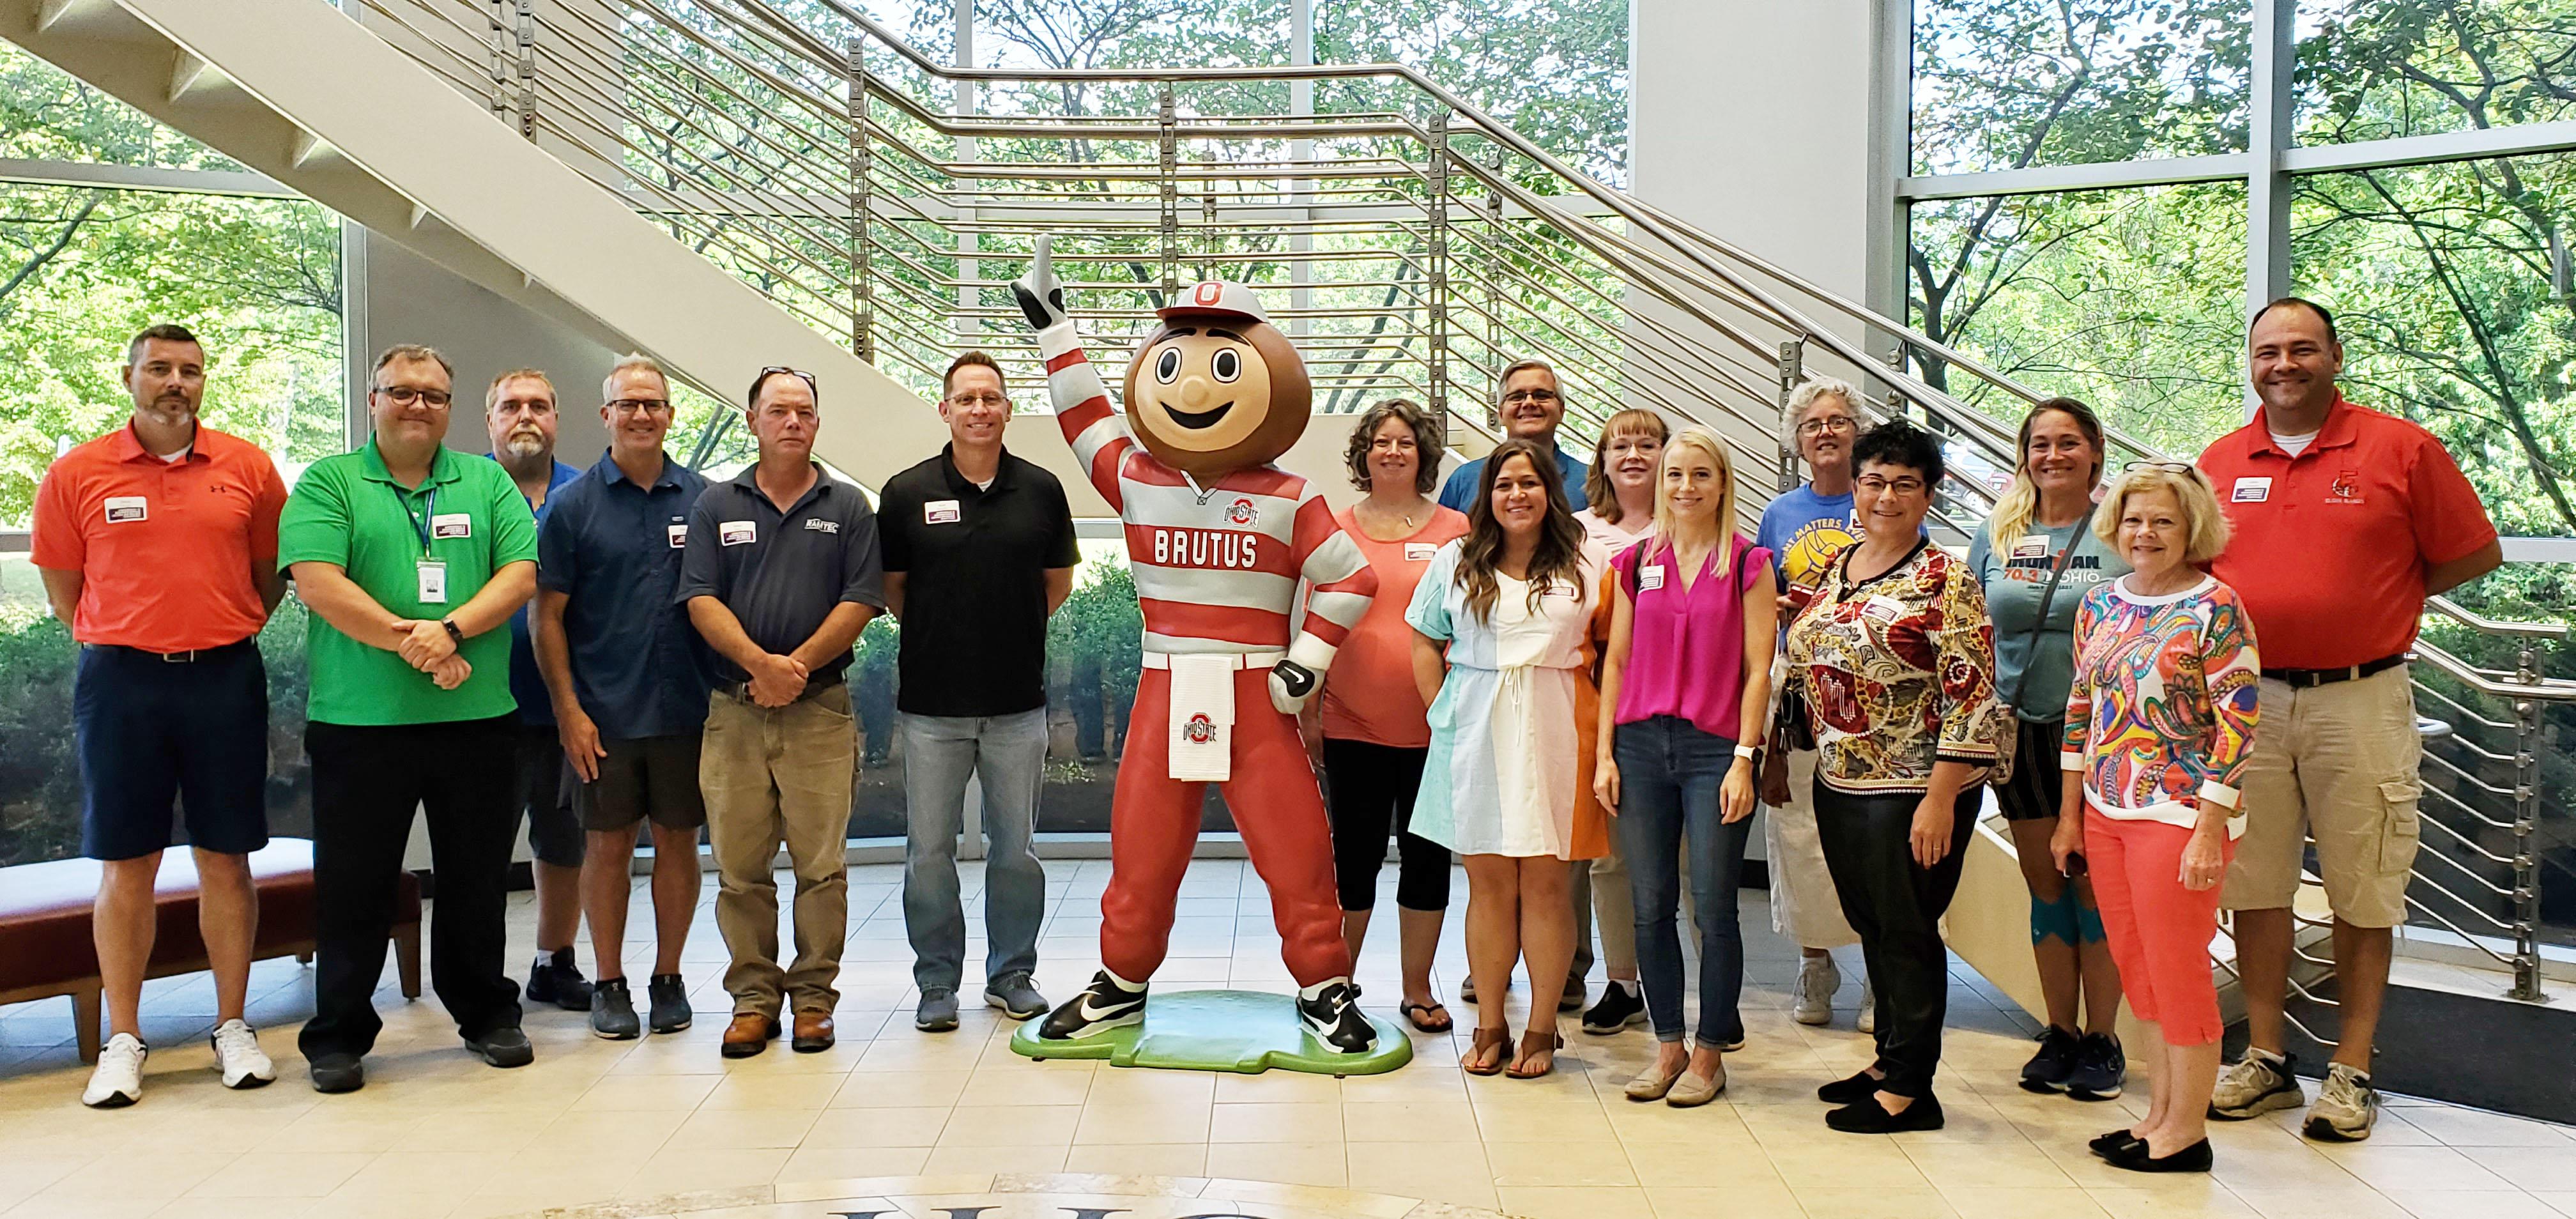 teachers participating in the Teacher Manufacturing Bootcamp standing around statue of Brutus